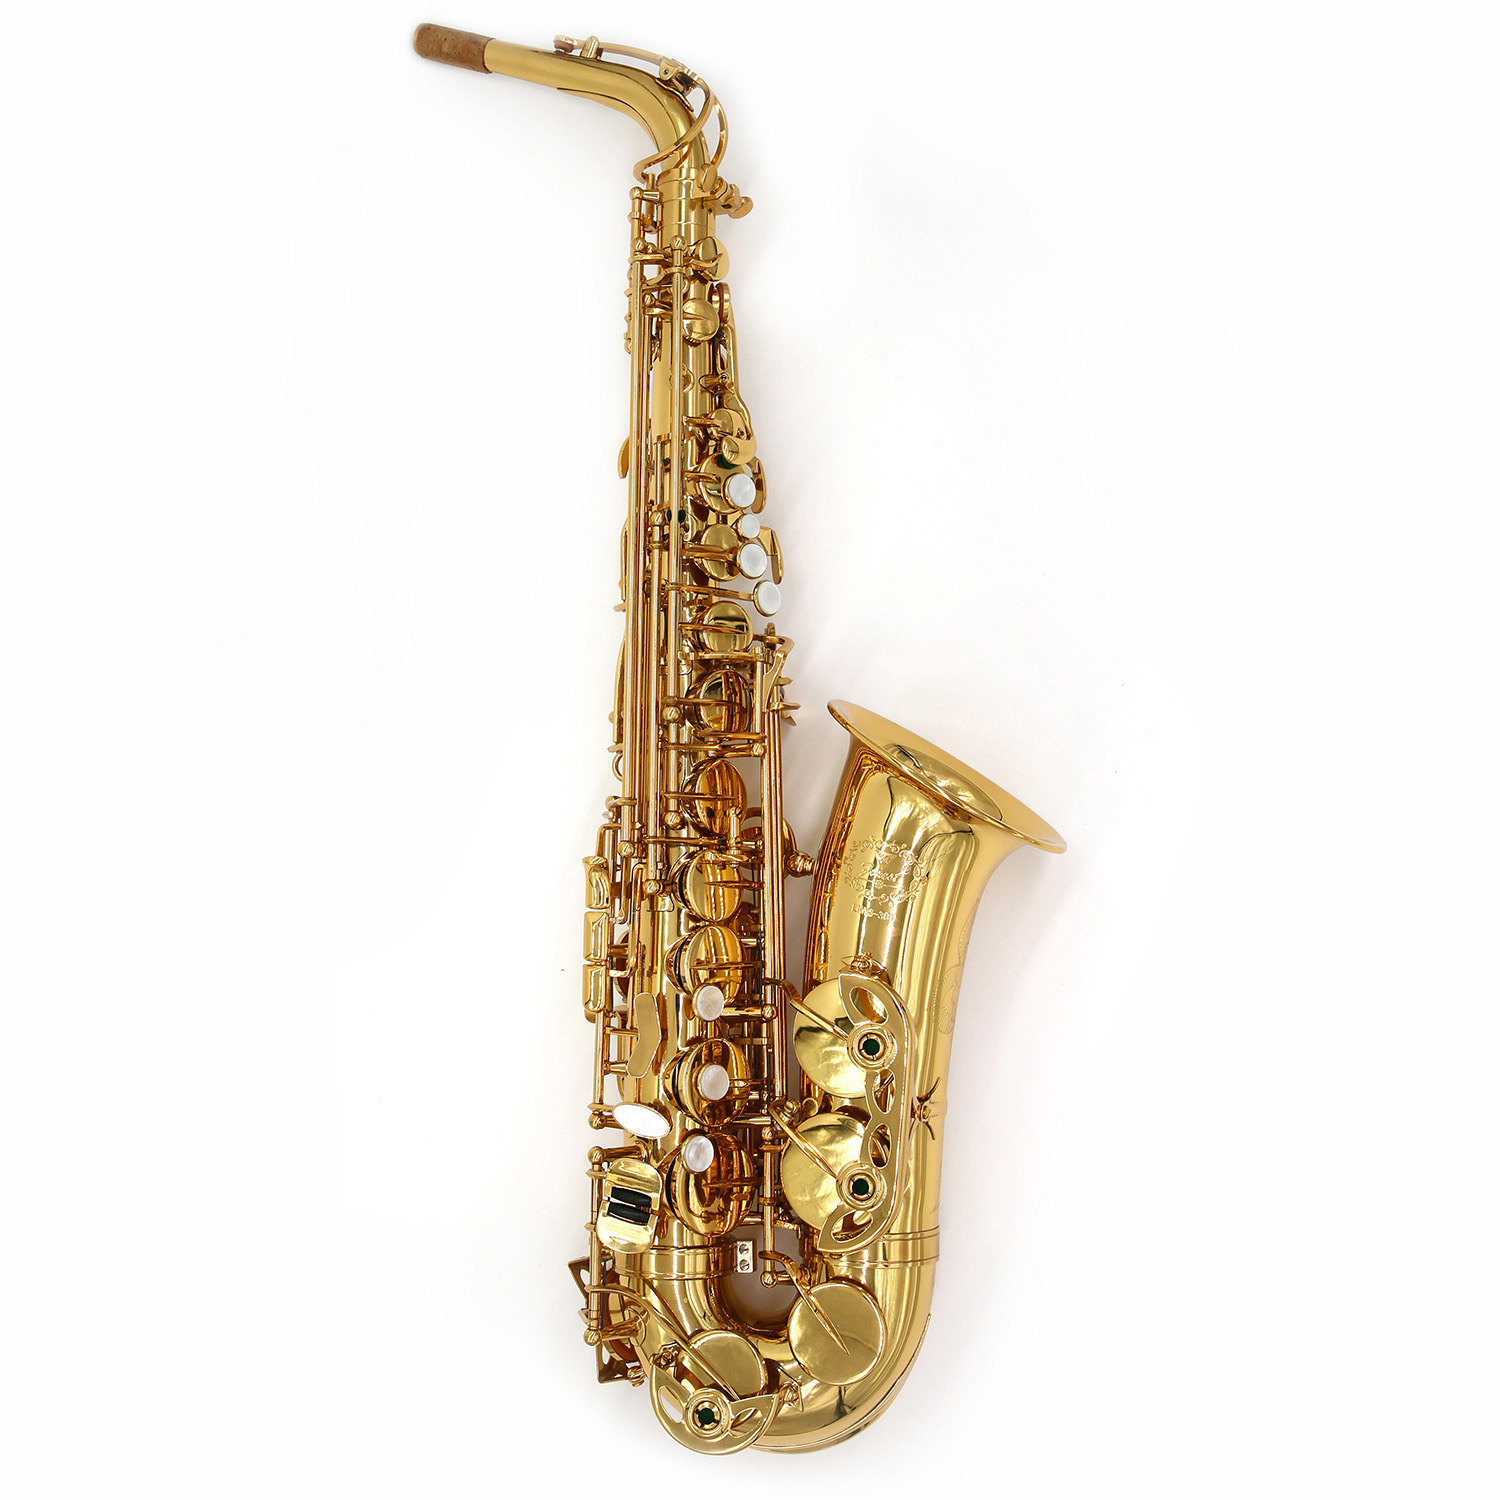 The Gold brass sax manufacturer takes you to understand the product features of the sax tube